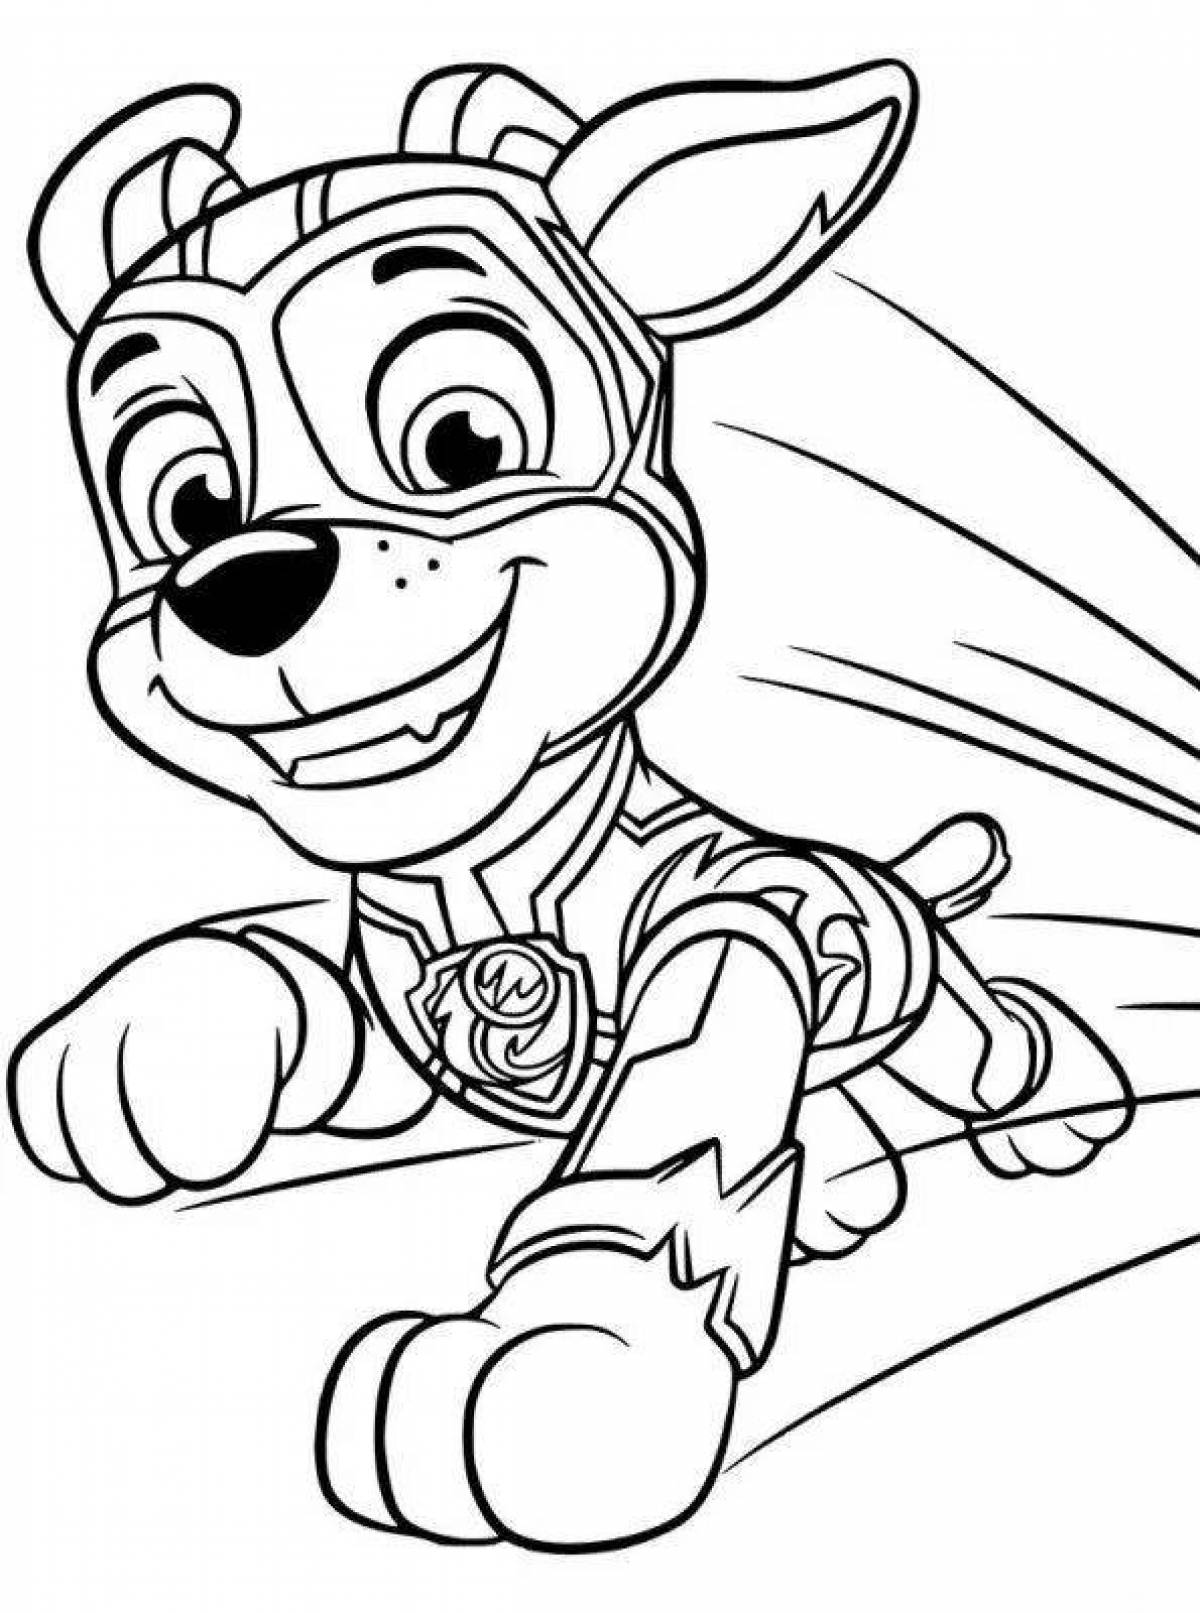 Animated coloring page paw patrol mega puppies